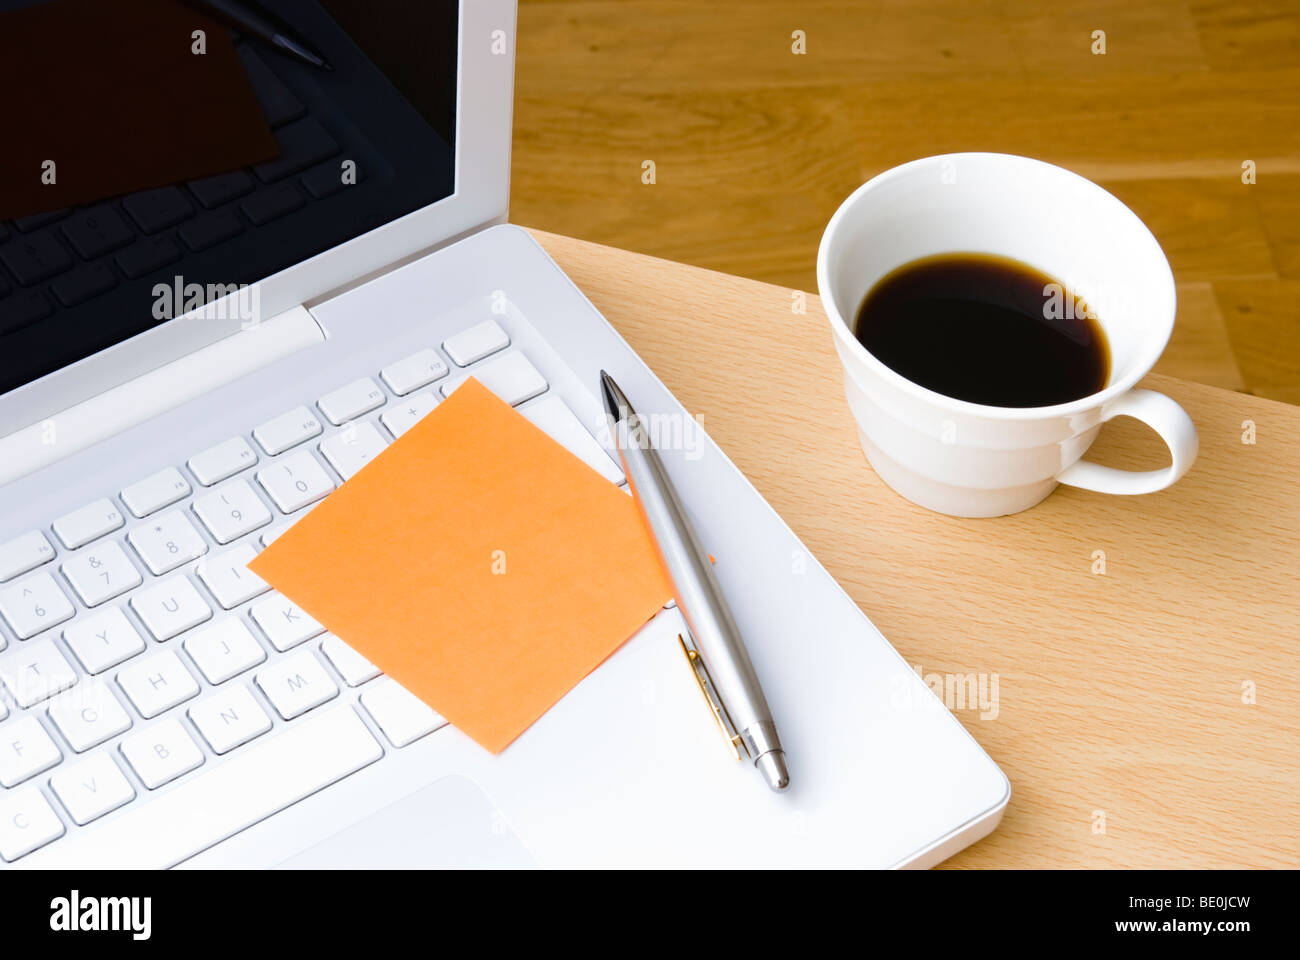 Blank orange postit note on white laptop keyboard with pen and cup of coffee Stock Photo